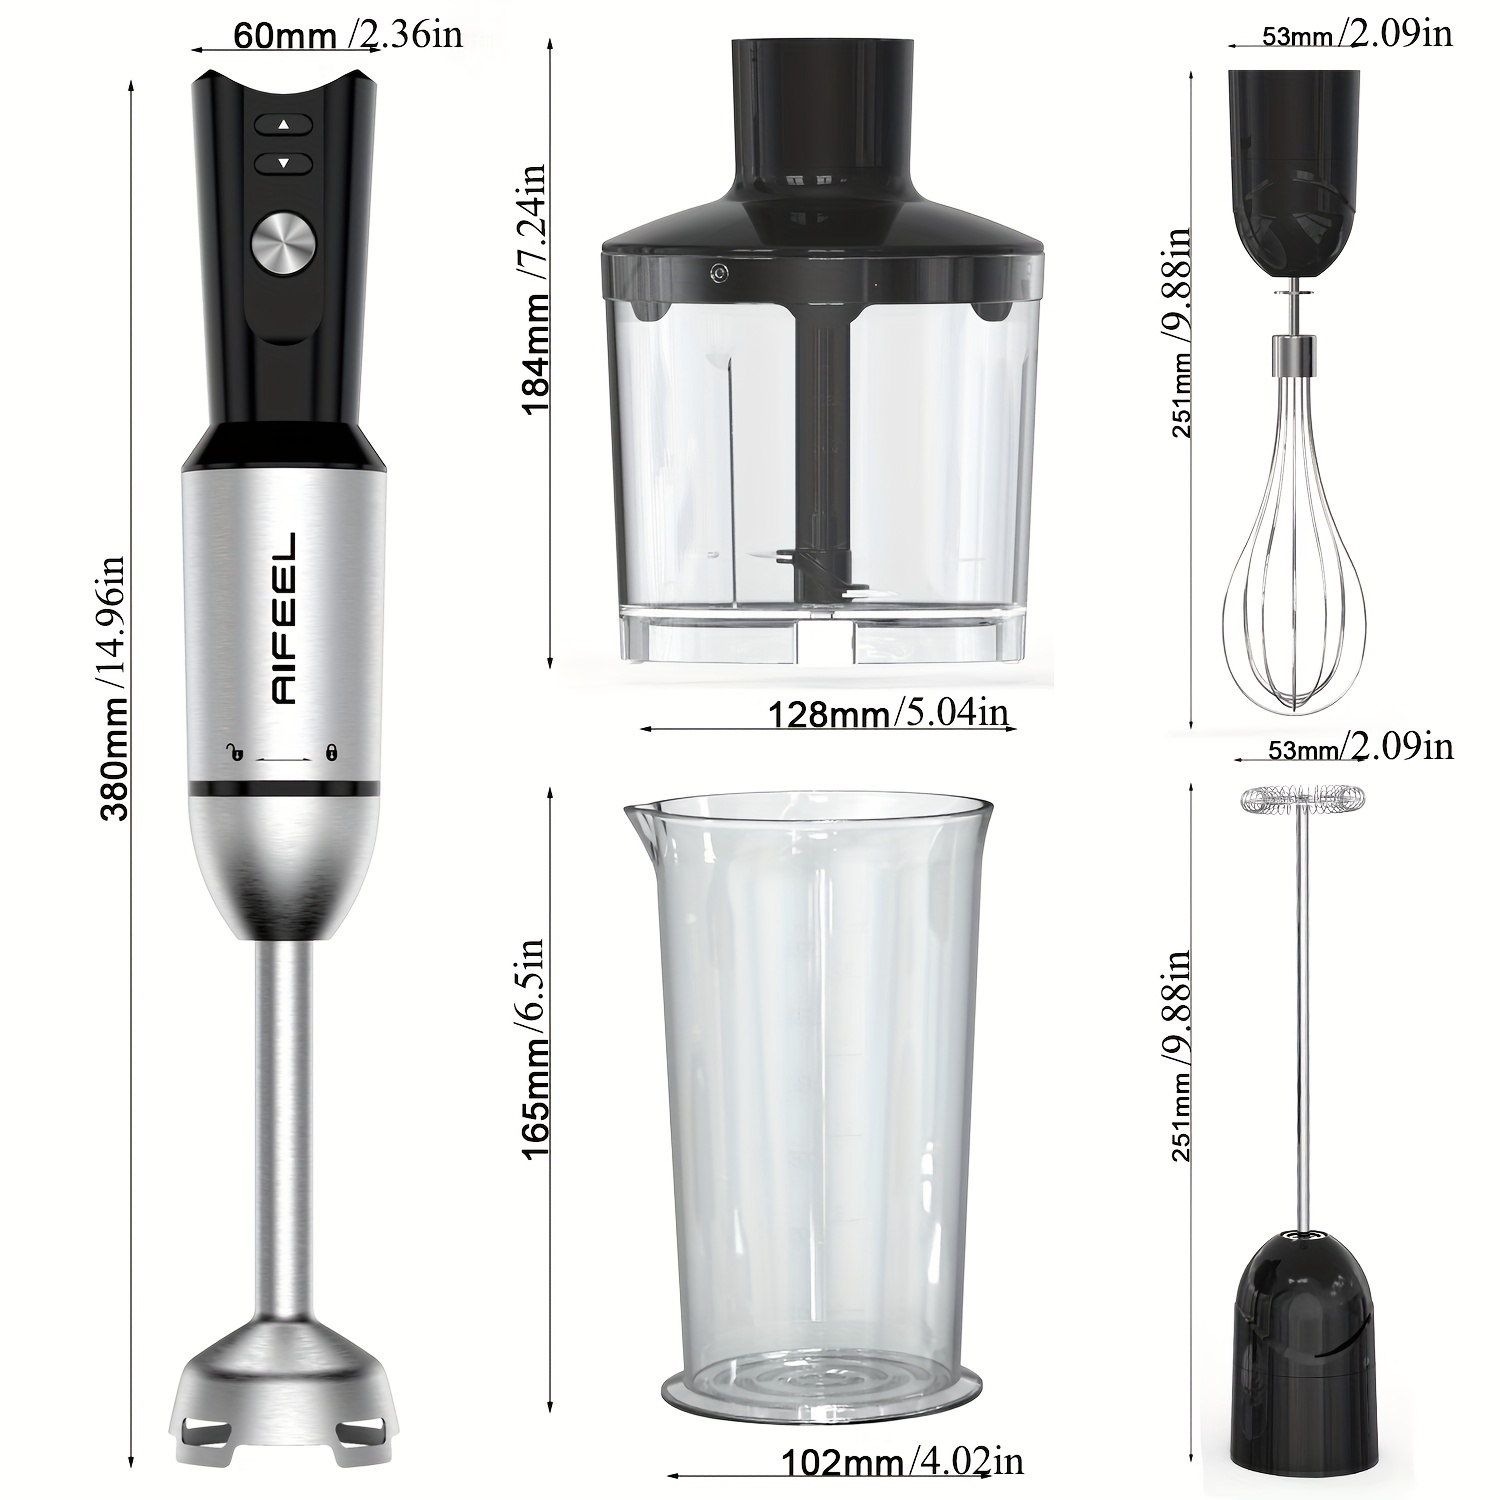 AIFEEL Immersion Hand Blender,Handheld Stick Blender with Ice  Chopper,Stainless Steel Whisk and Milk Frother for Smoothie, Baby Food,  Sauces,Puree